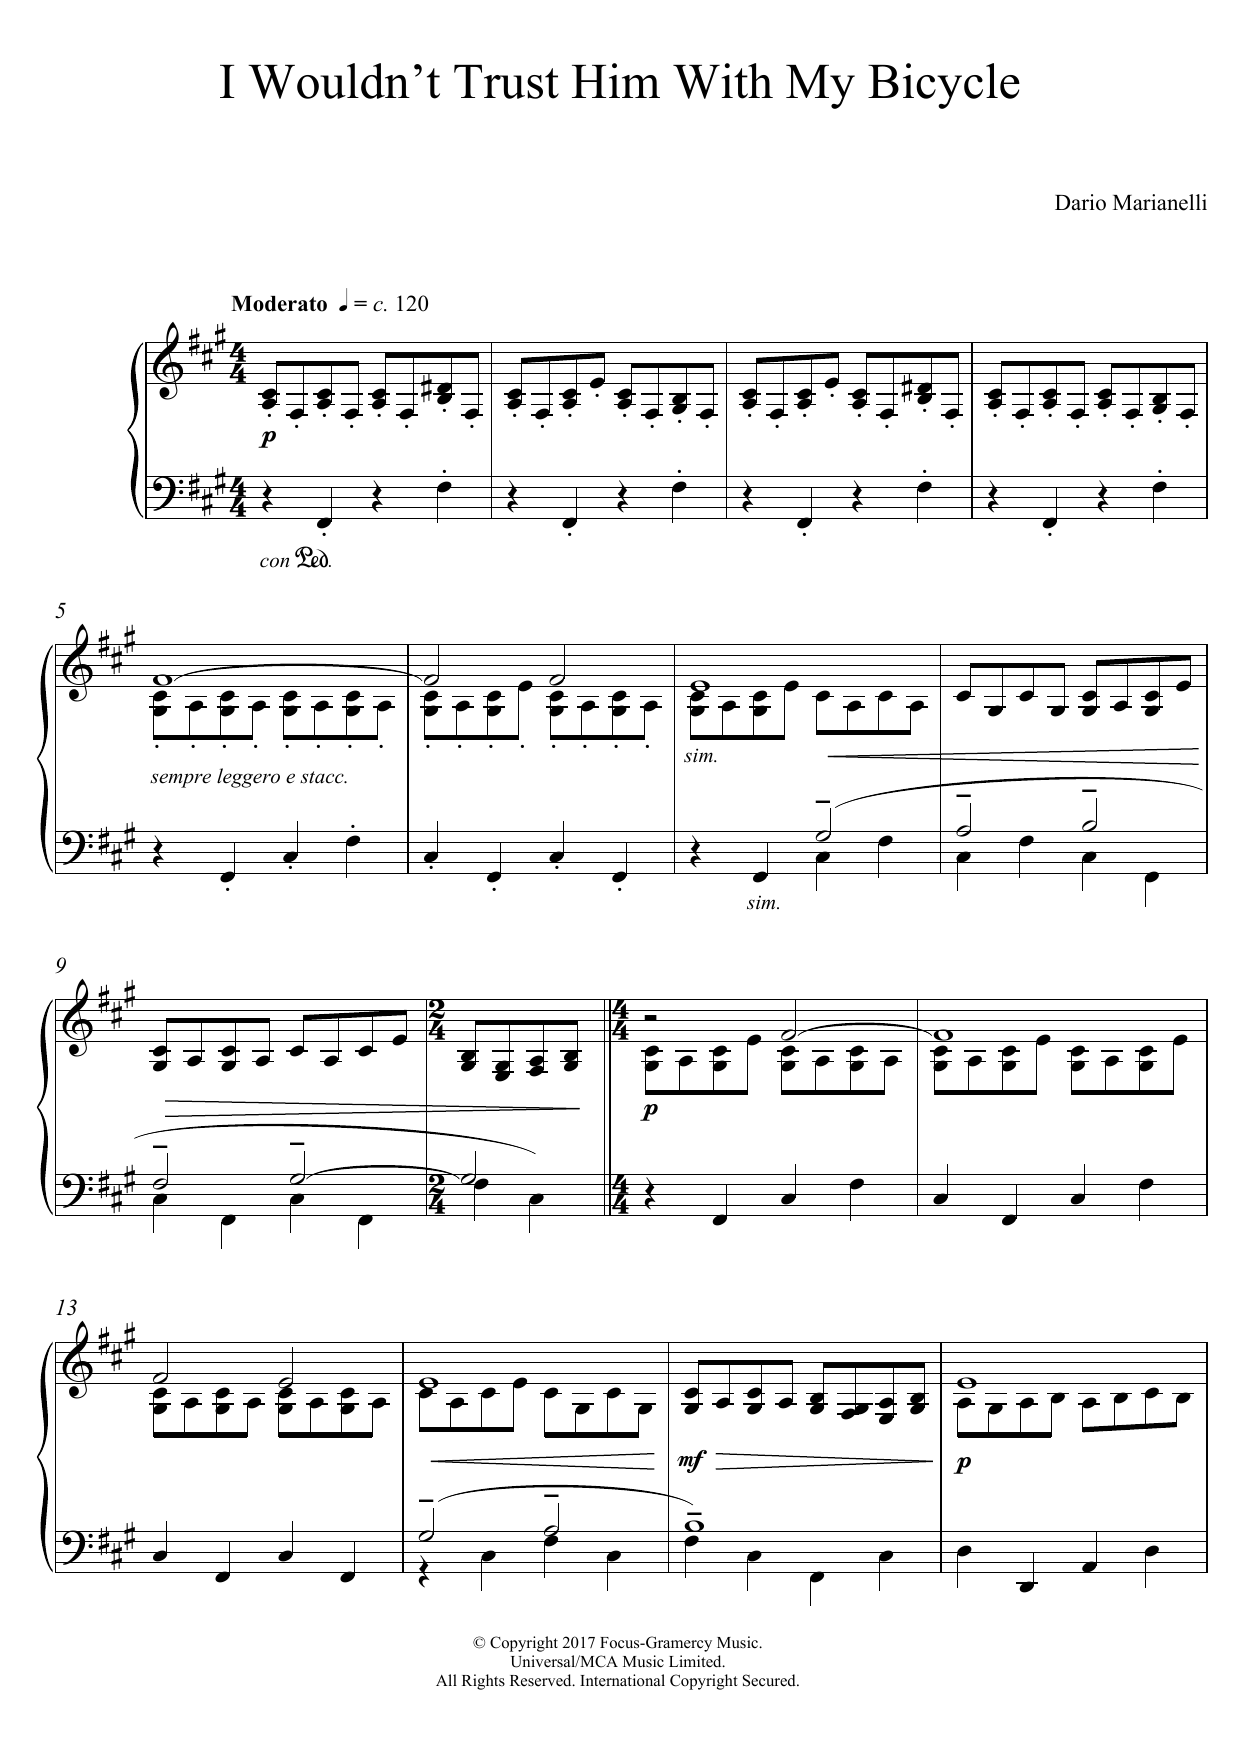 Download Dario Marianelli I Wouldn't Trust Him With My Bicycle (f Sheet Music